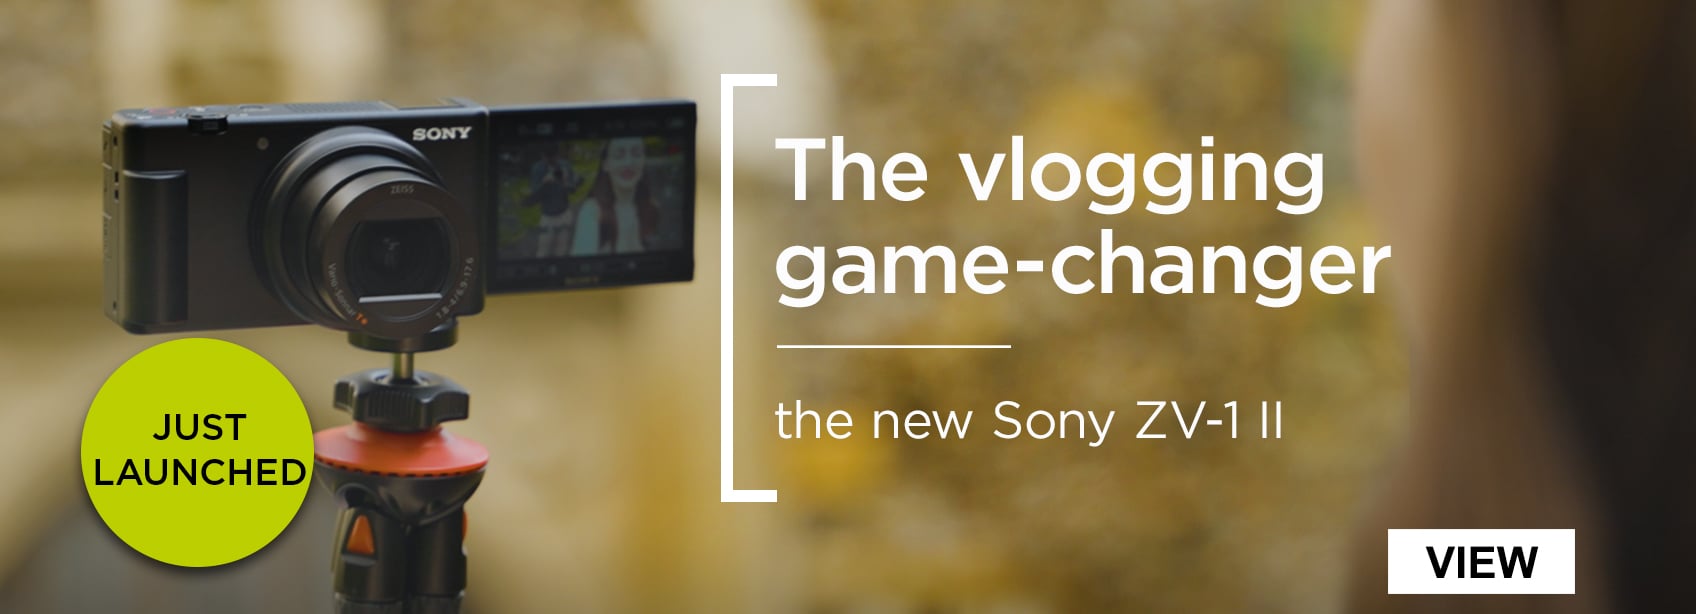 The vlogging game-changer the new Sony ZV-1 II. Just launched